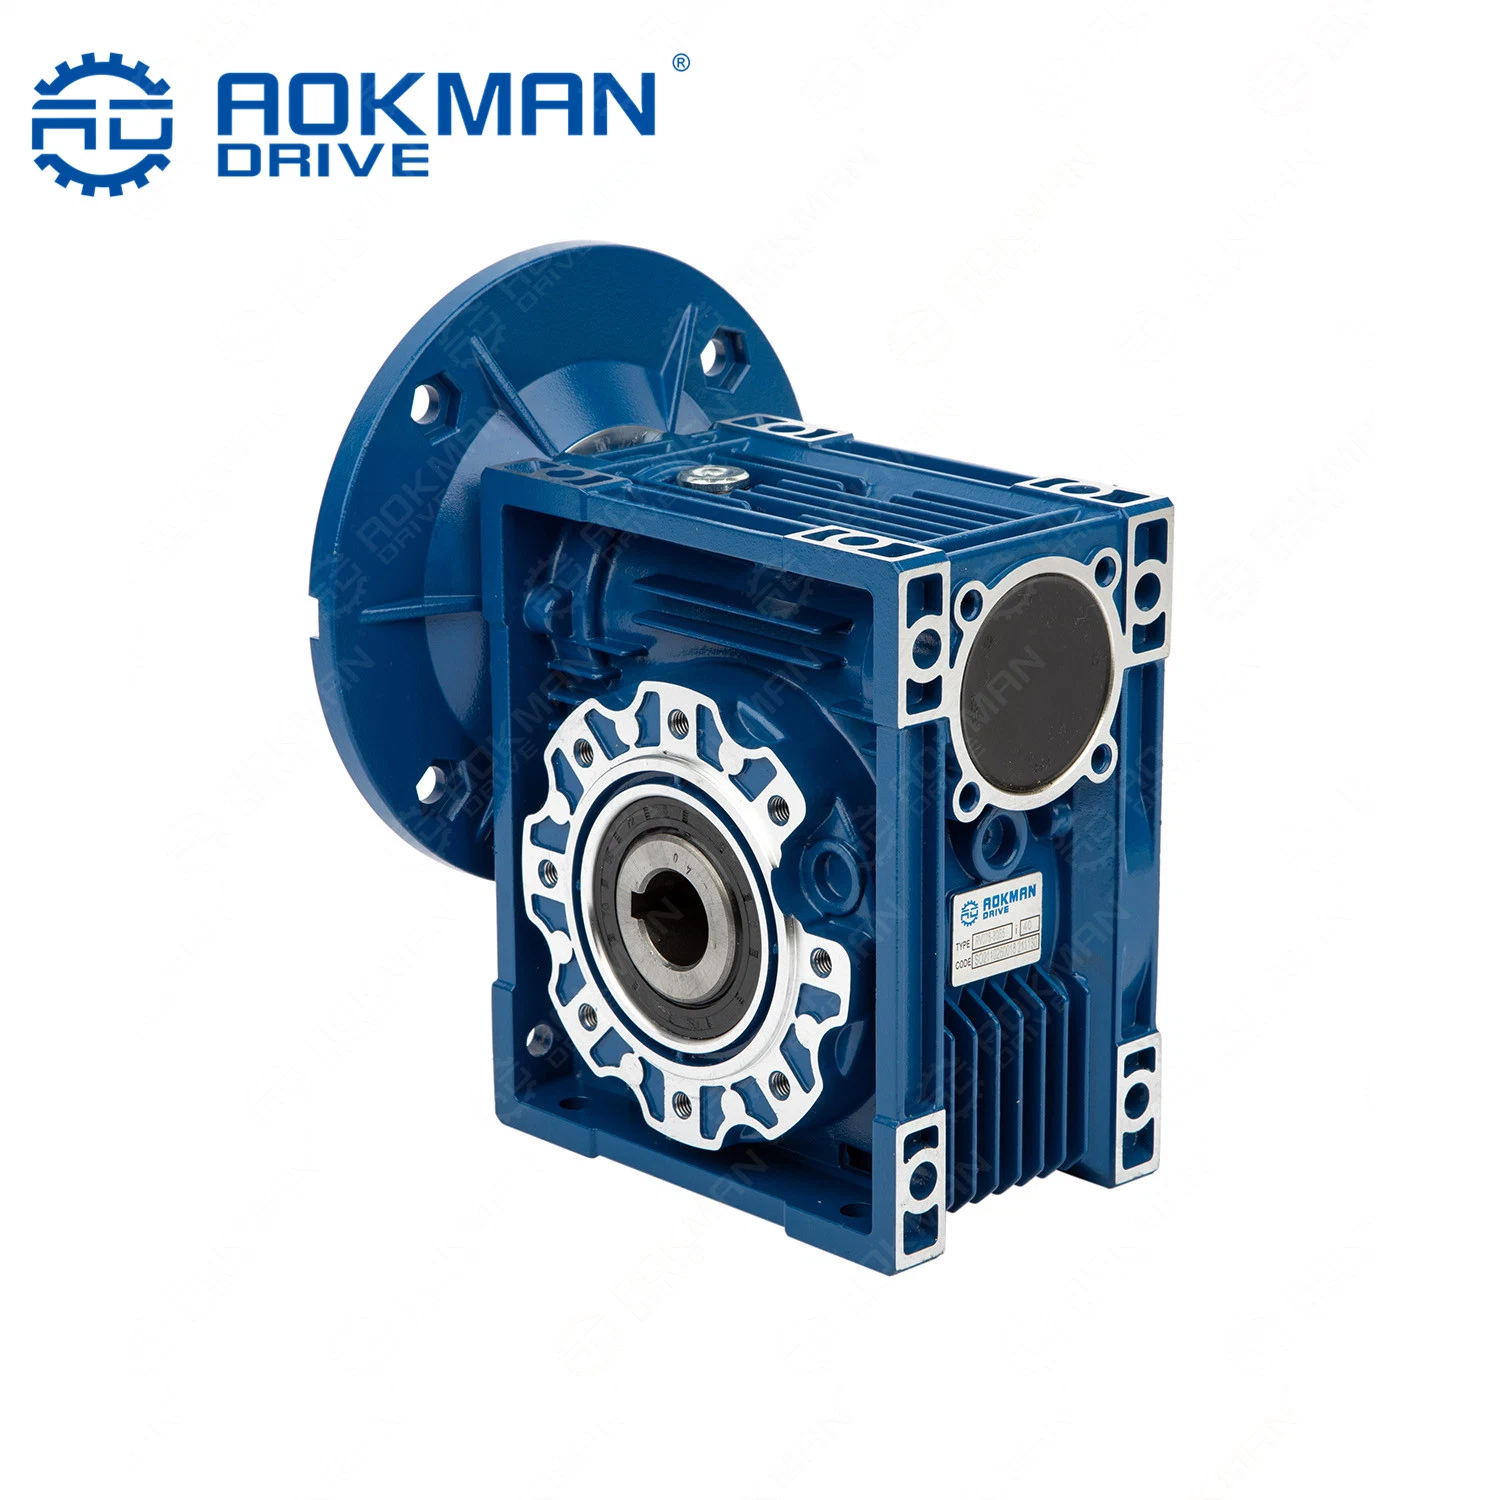 Aokman Nrv Series Worm Small Speed Reducer Gearbox with Extension Shaft